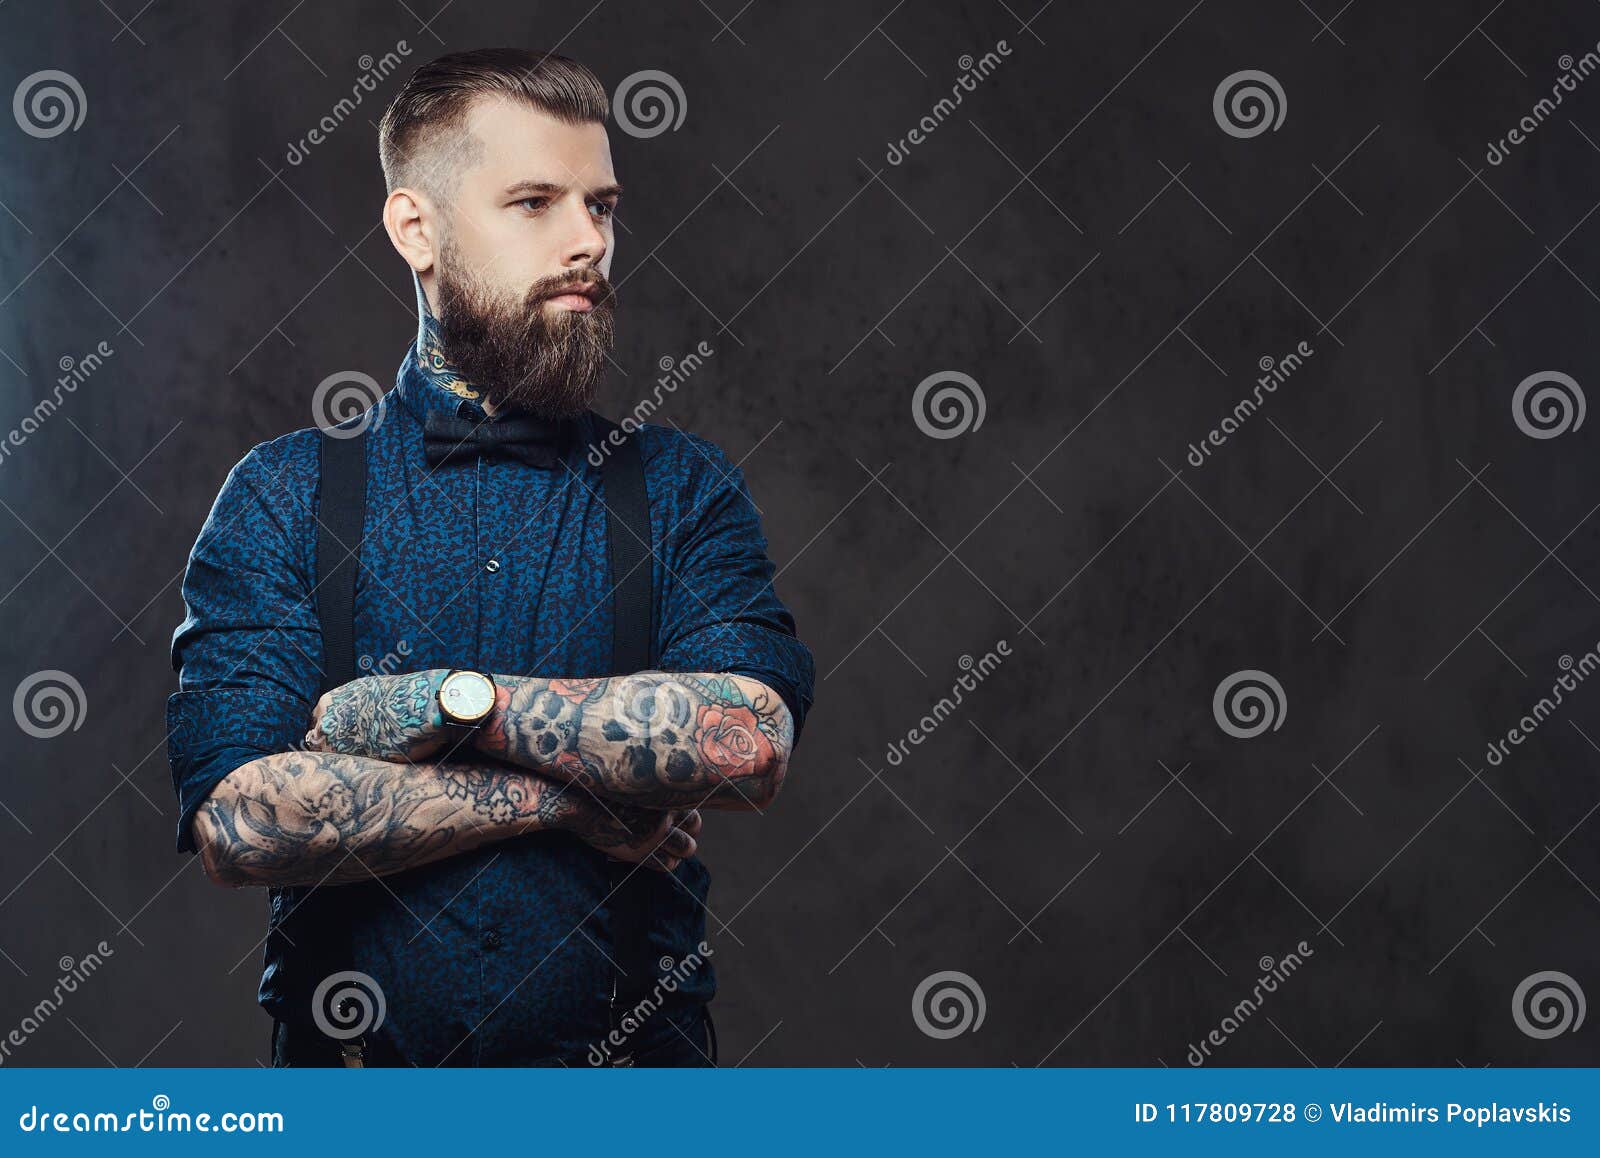 Portrait of a Handsome Old-fashioned Hipster in a Blue Shirt and ...